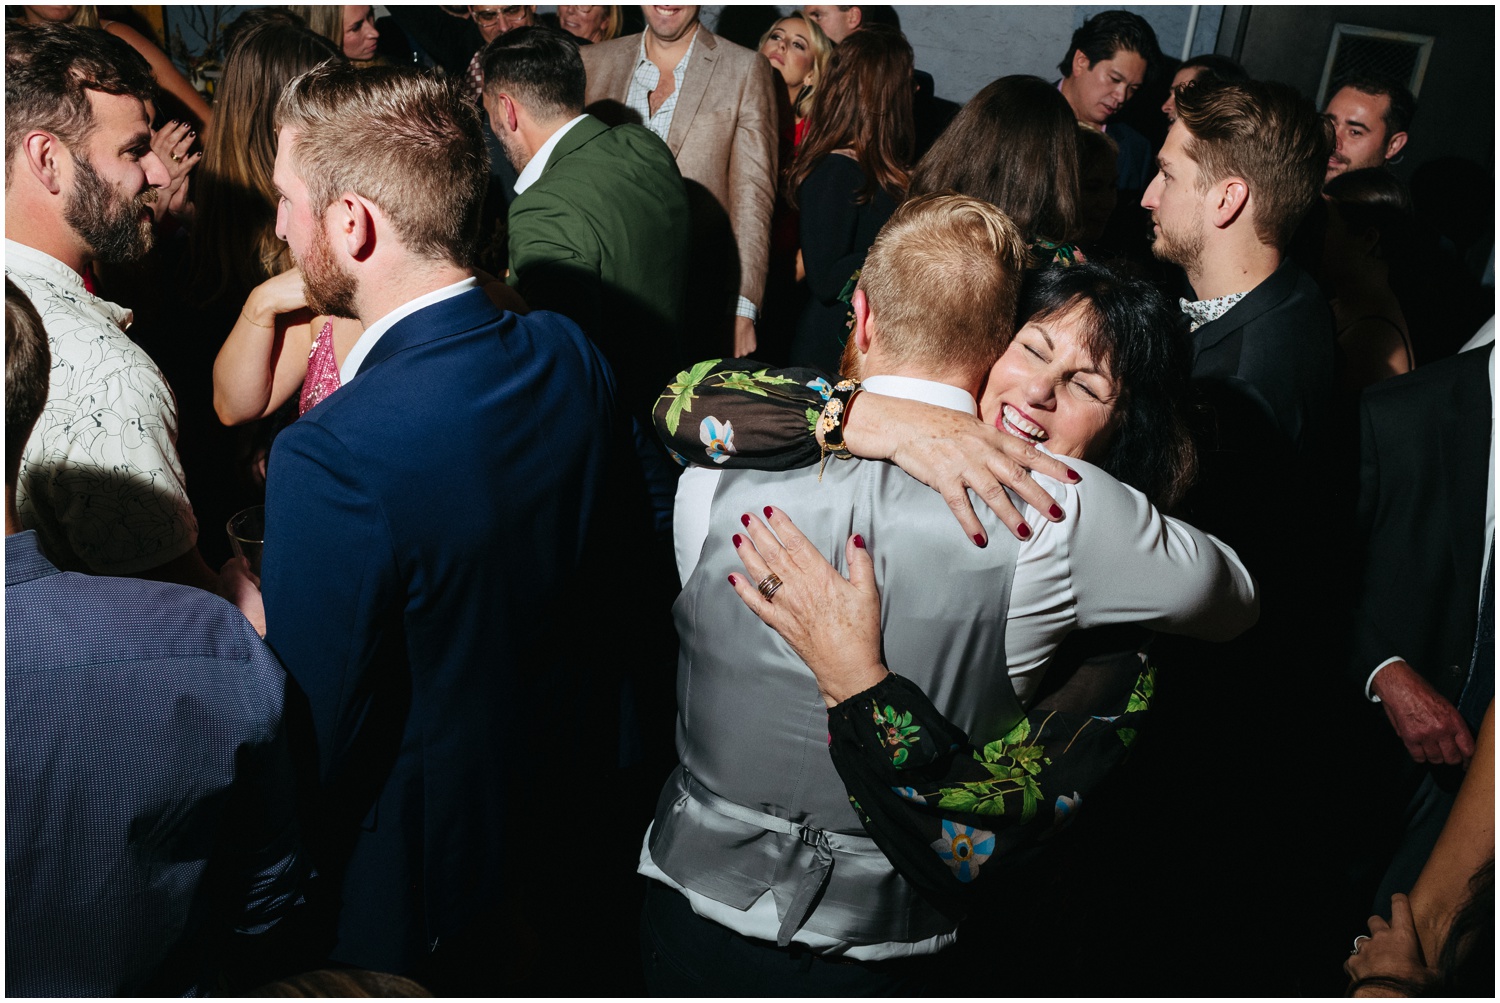 The groom's mom hugs a guest while they dance at a Philadelphia wedding